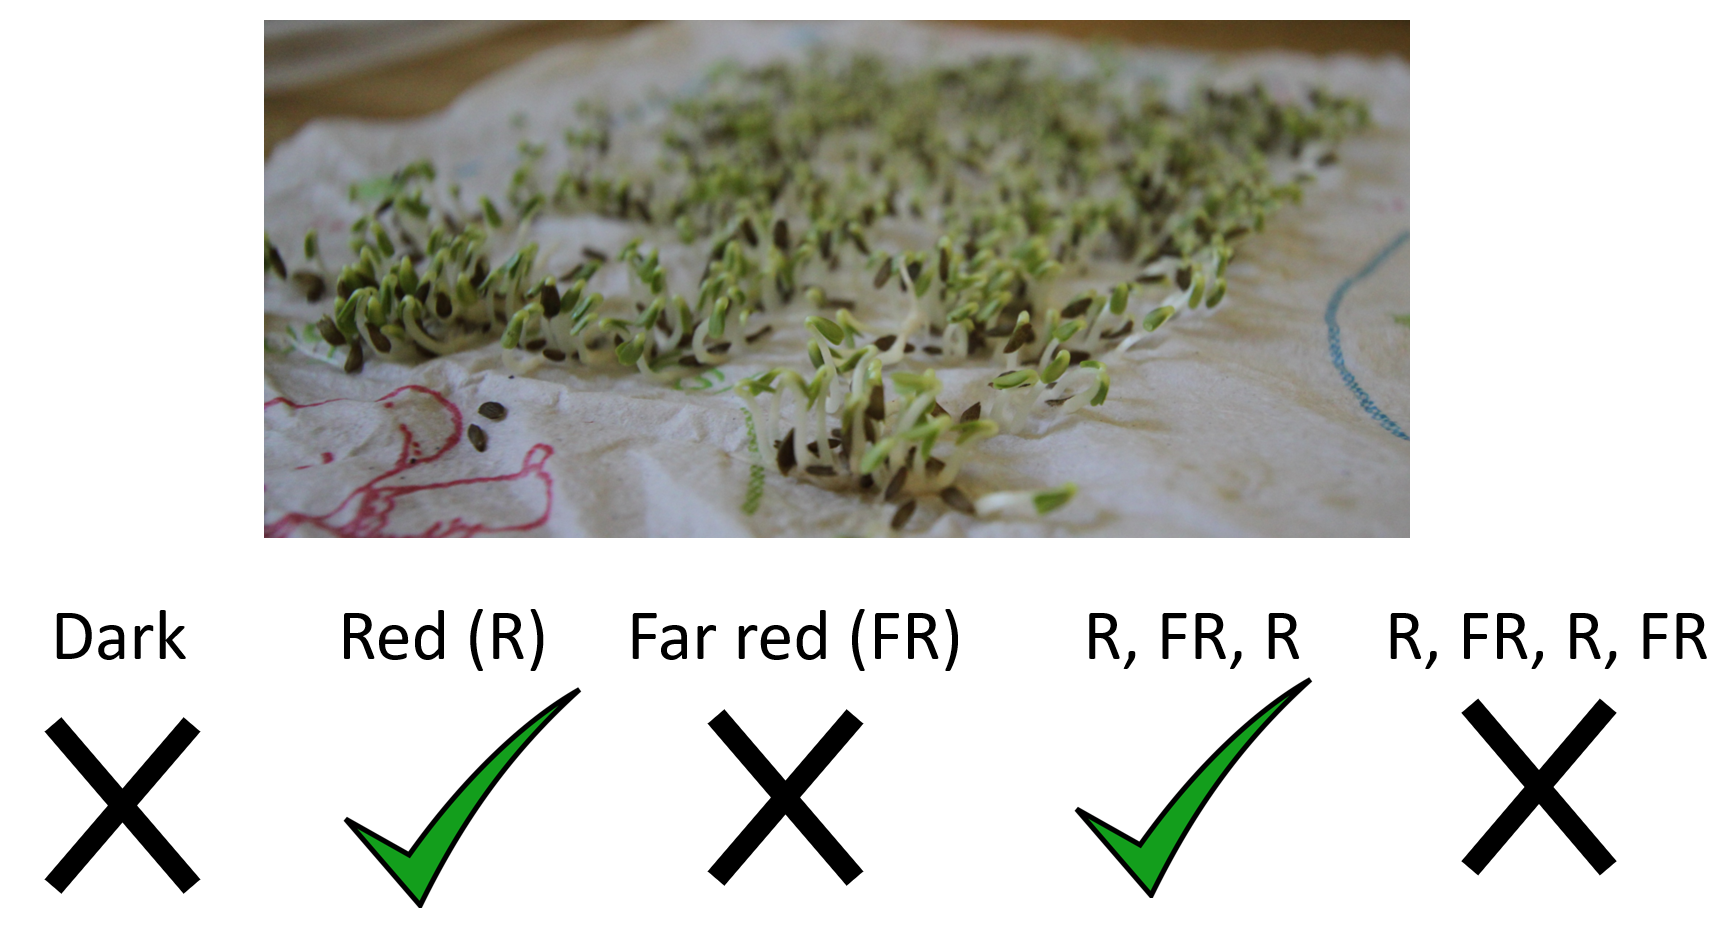 Experiment showing the role of light in lettuce germination